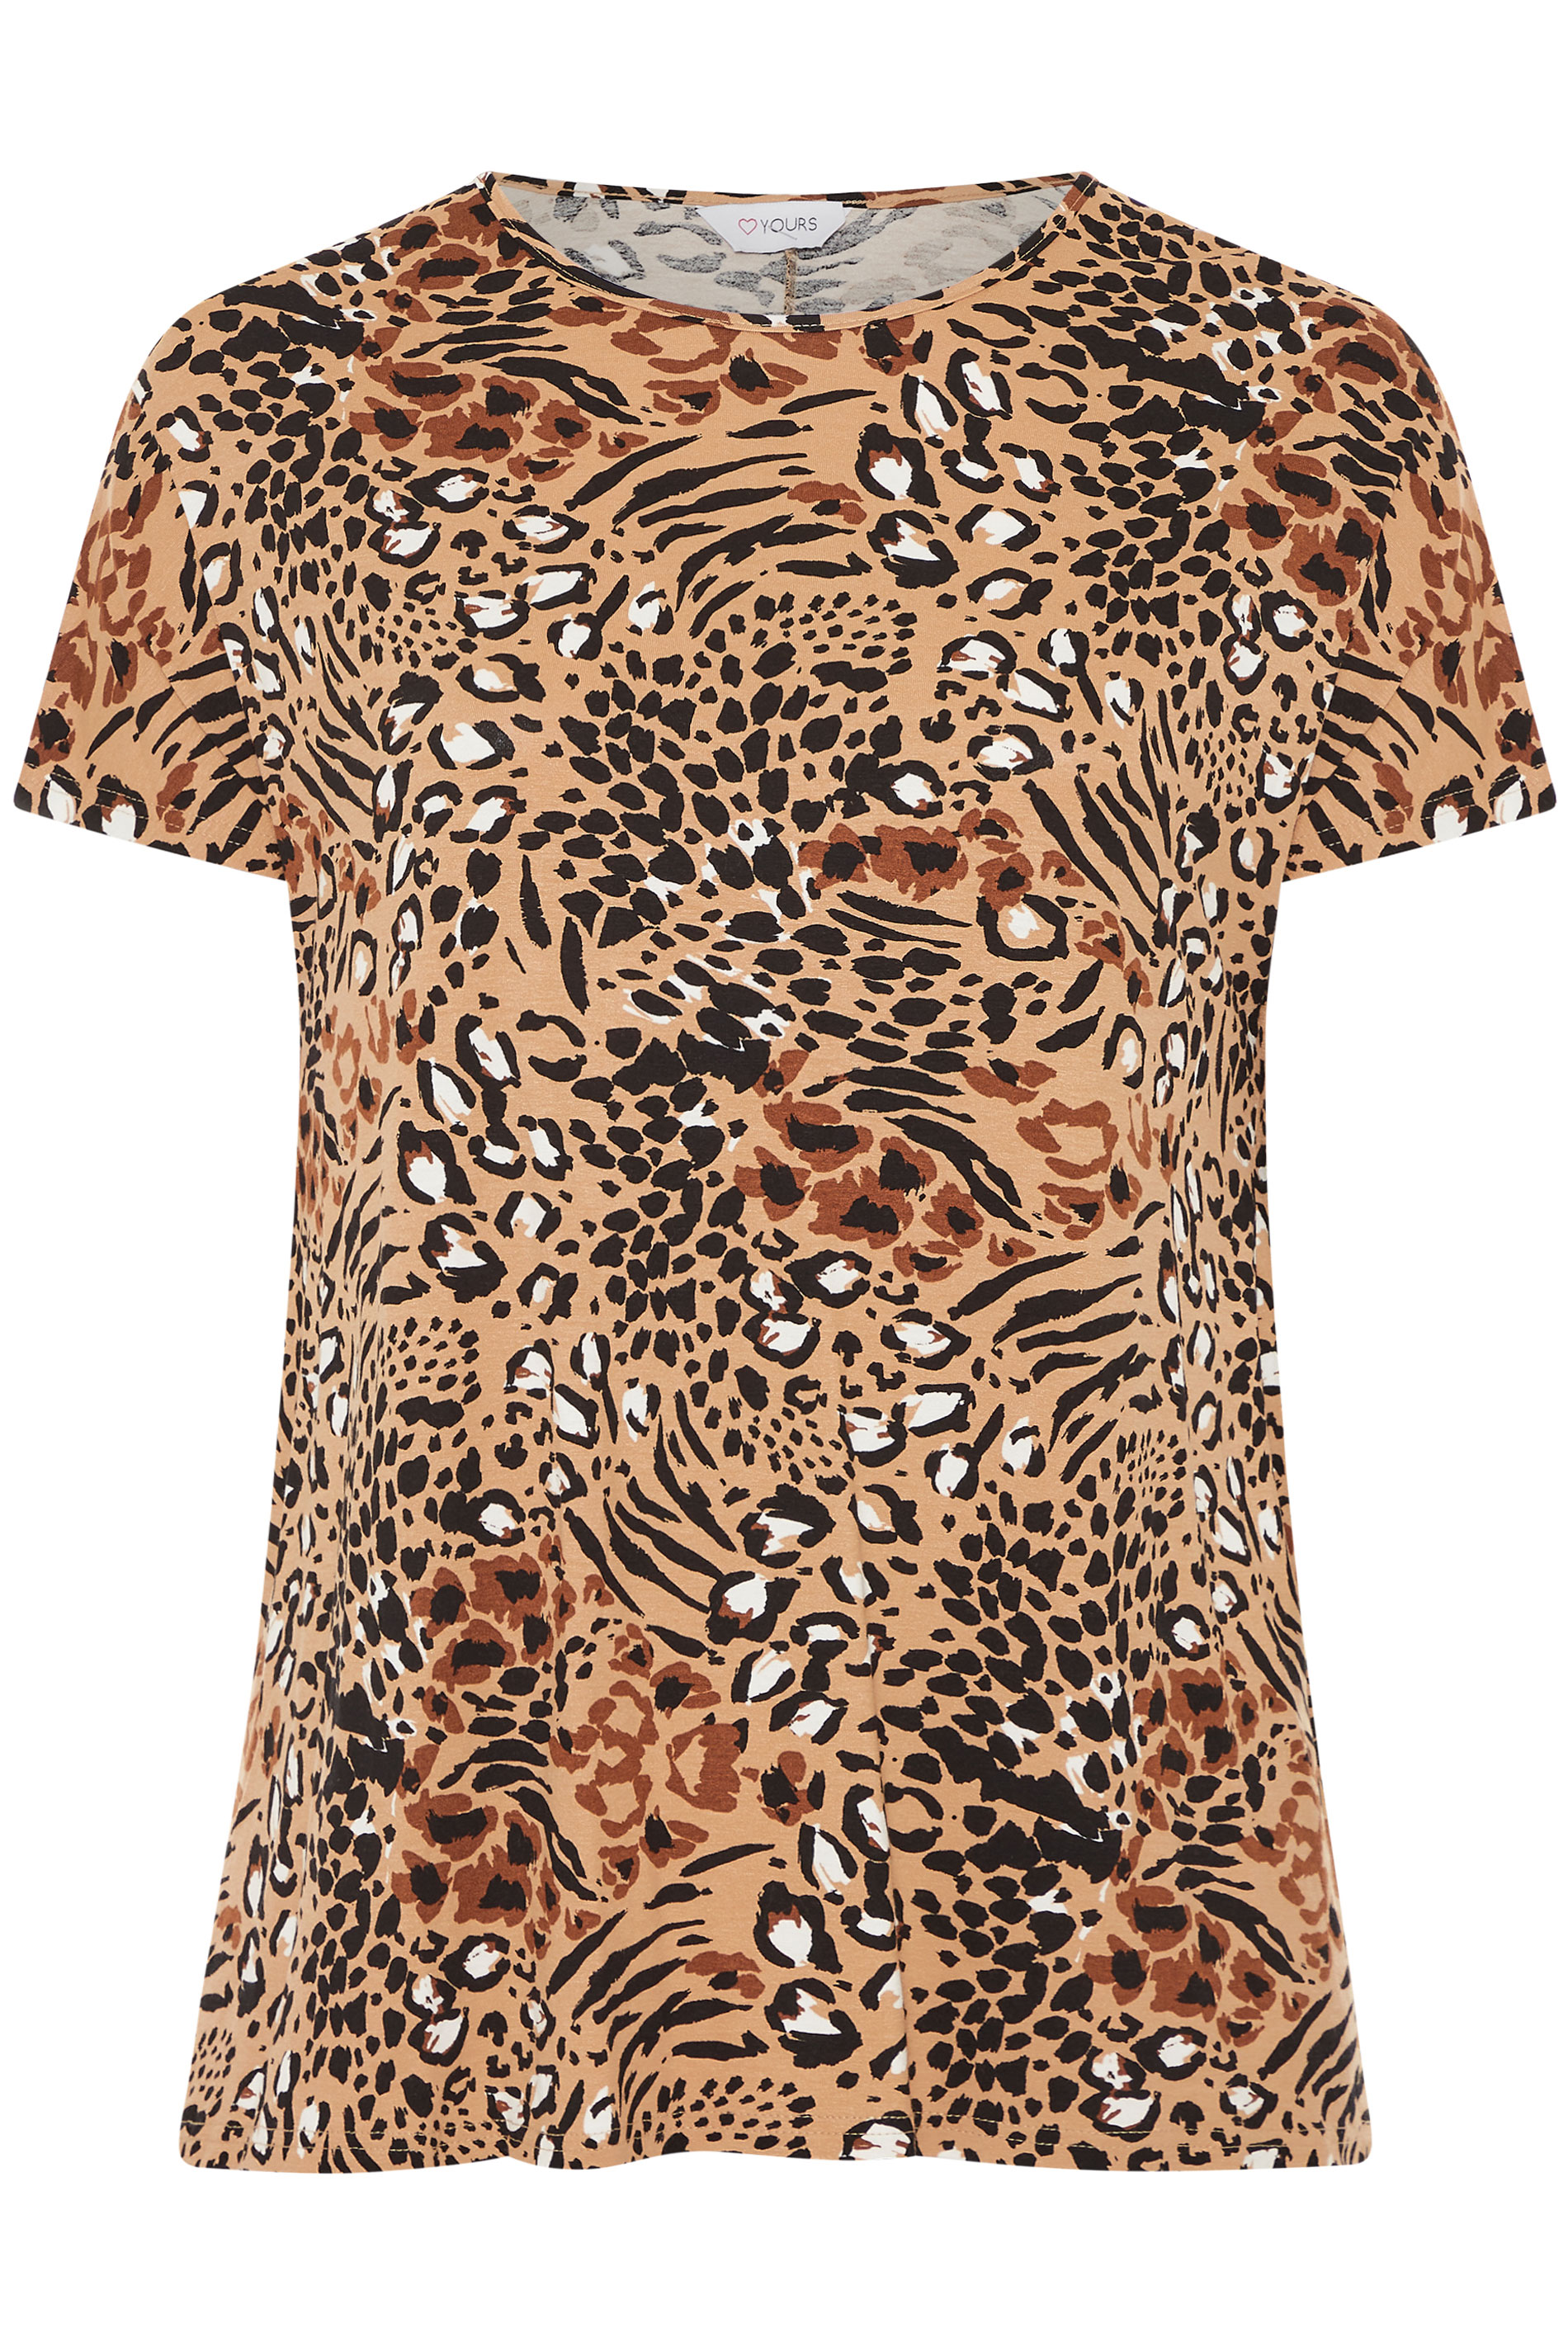 Brown Animal Print Grown on Sleeve T-Shirt | Yours Clothing